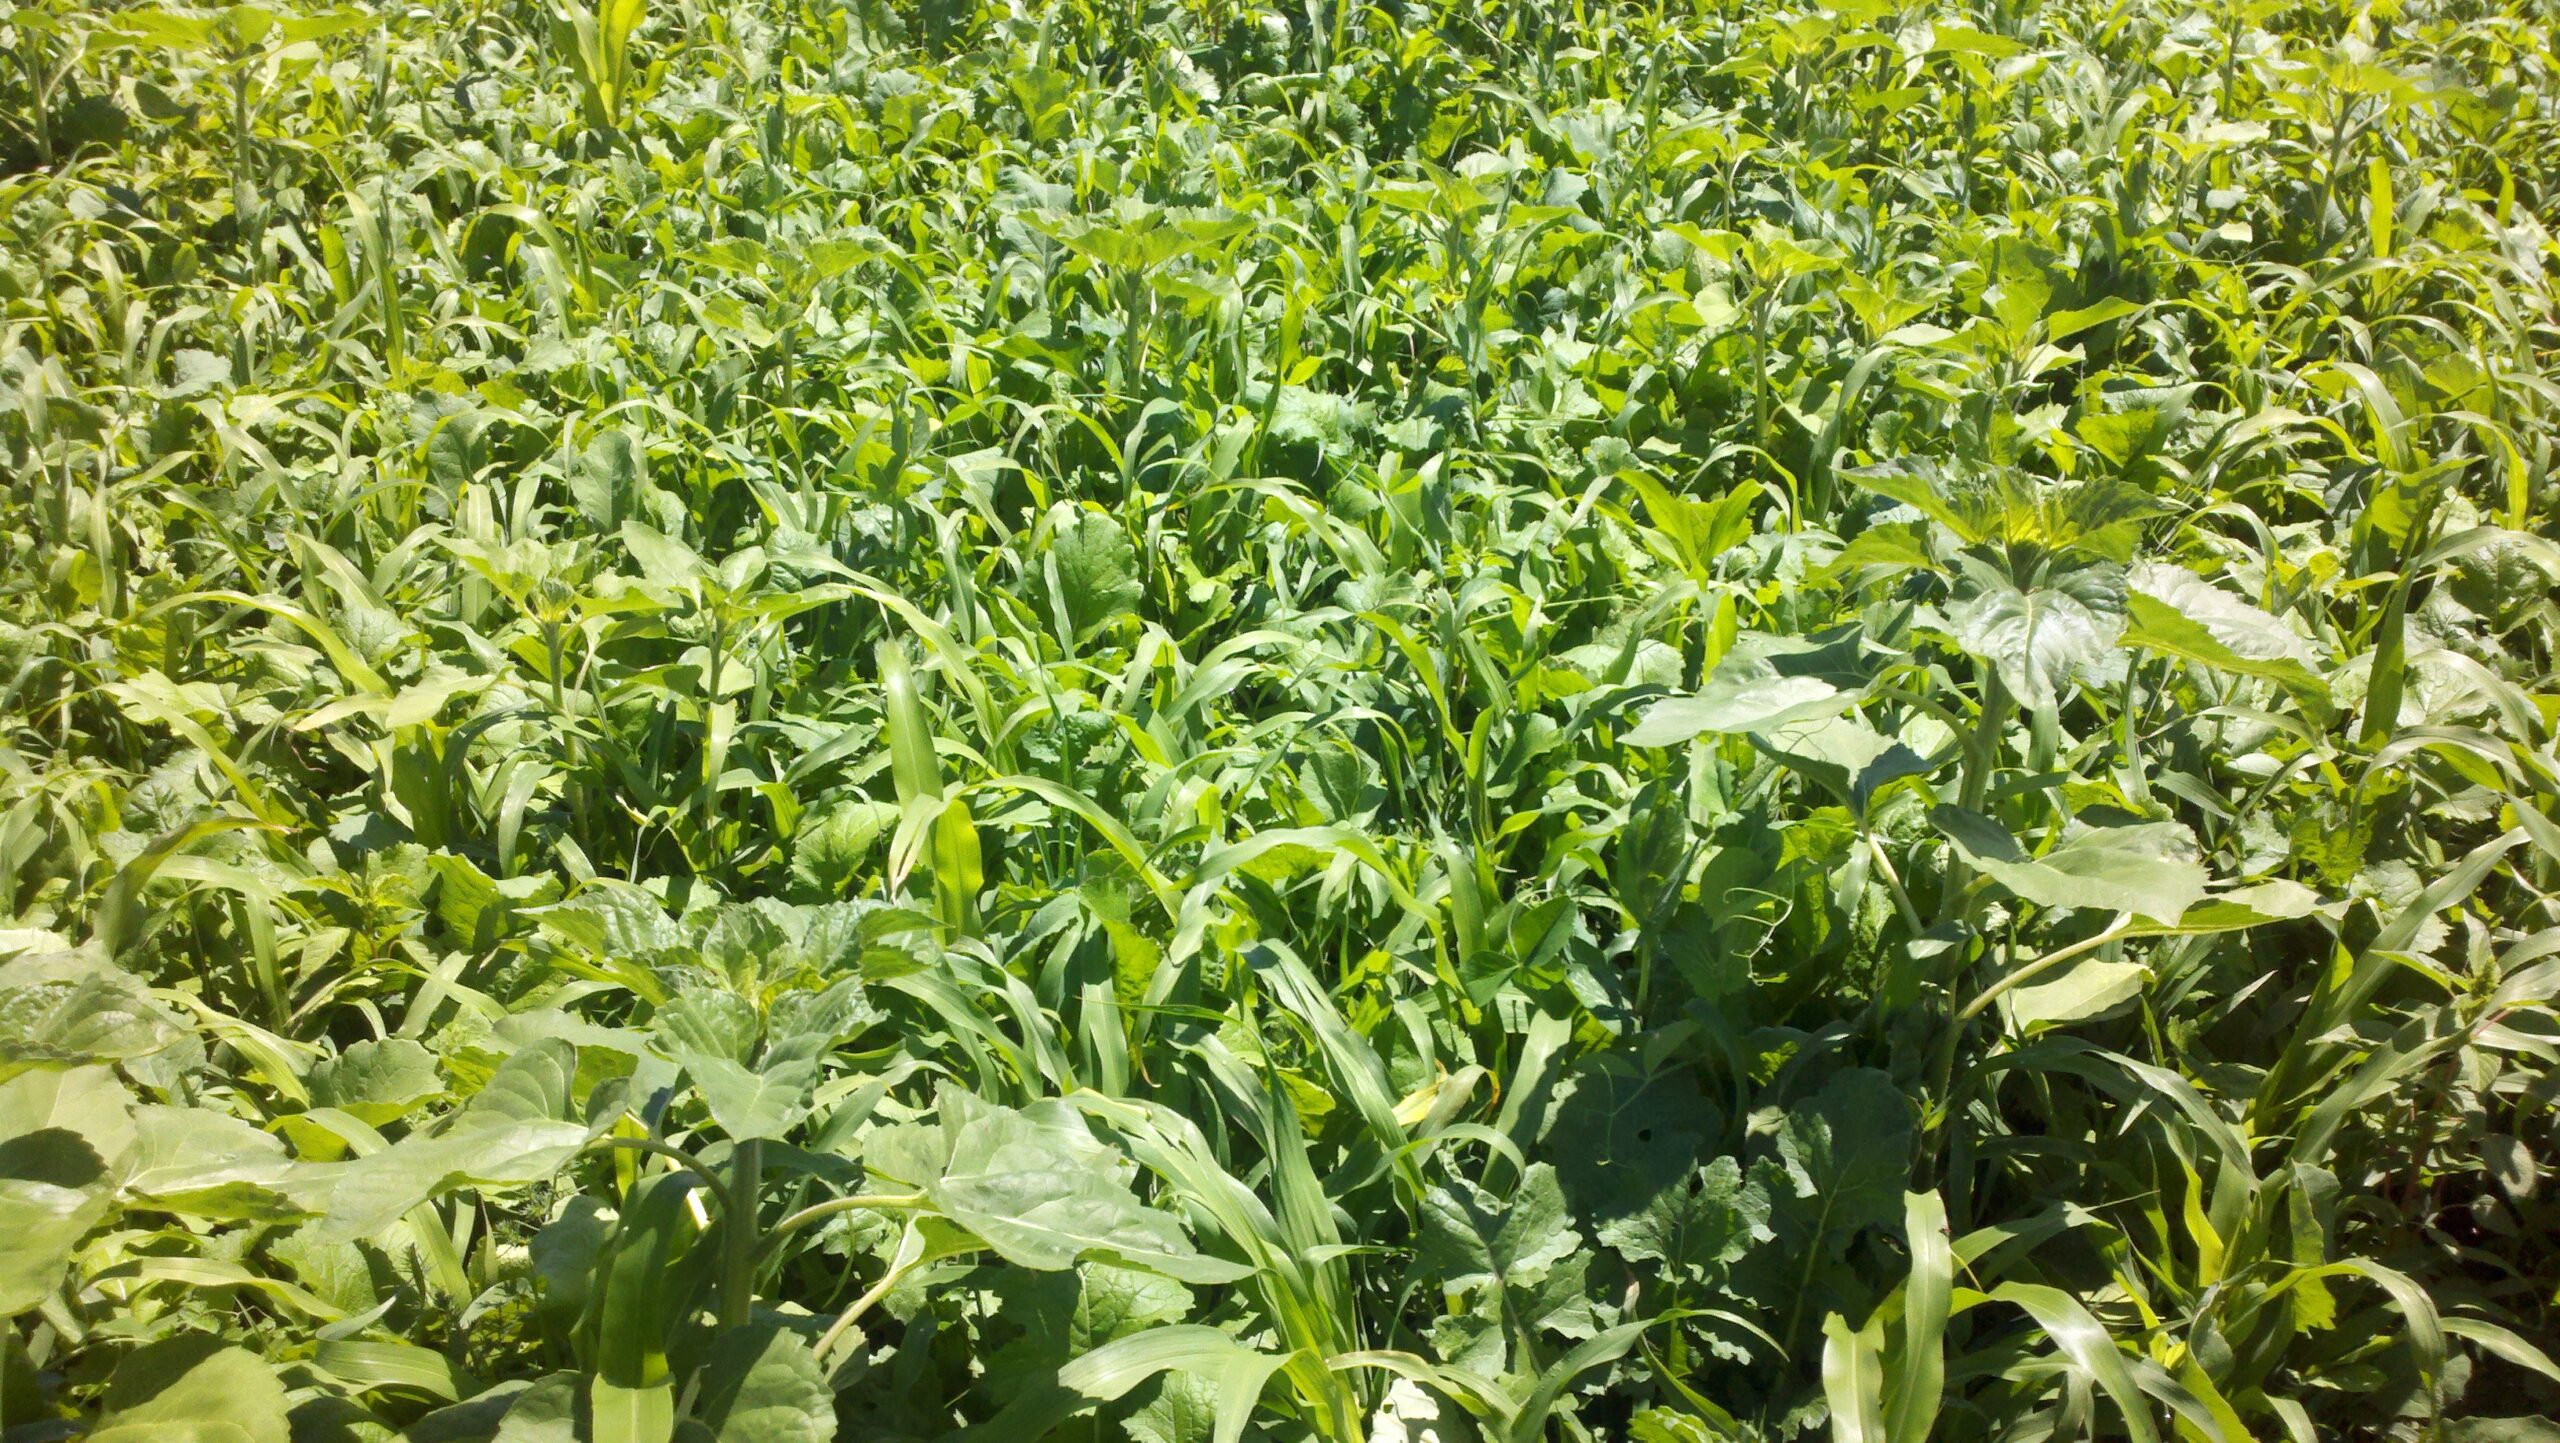 What Should Go in Your Spring Forage Mix?